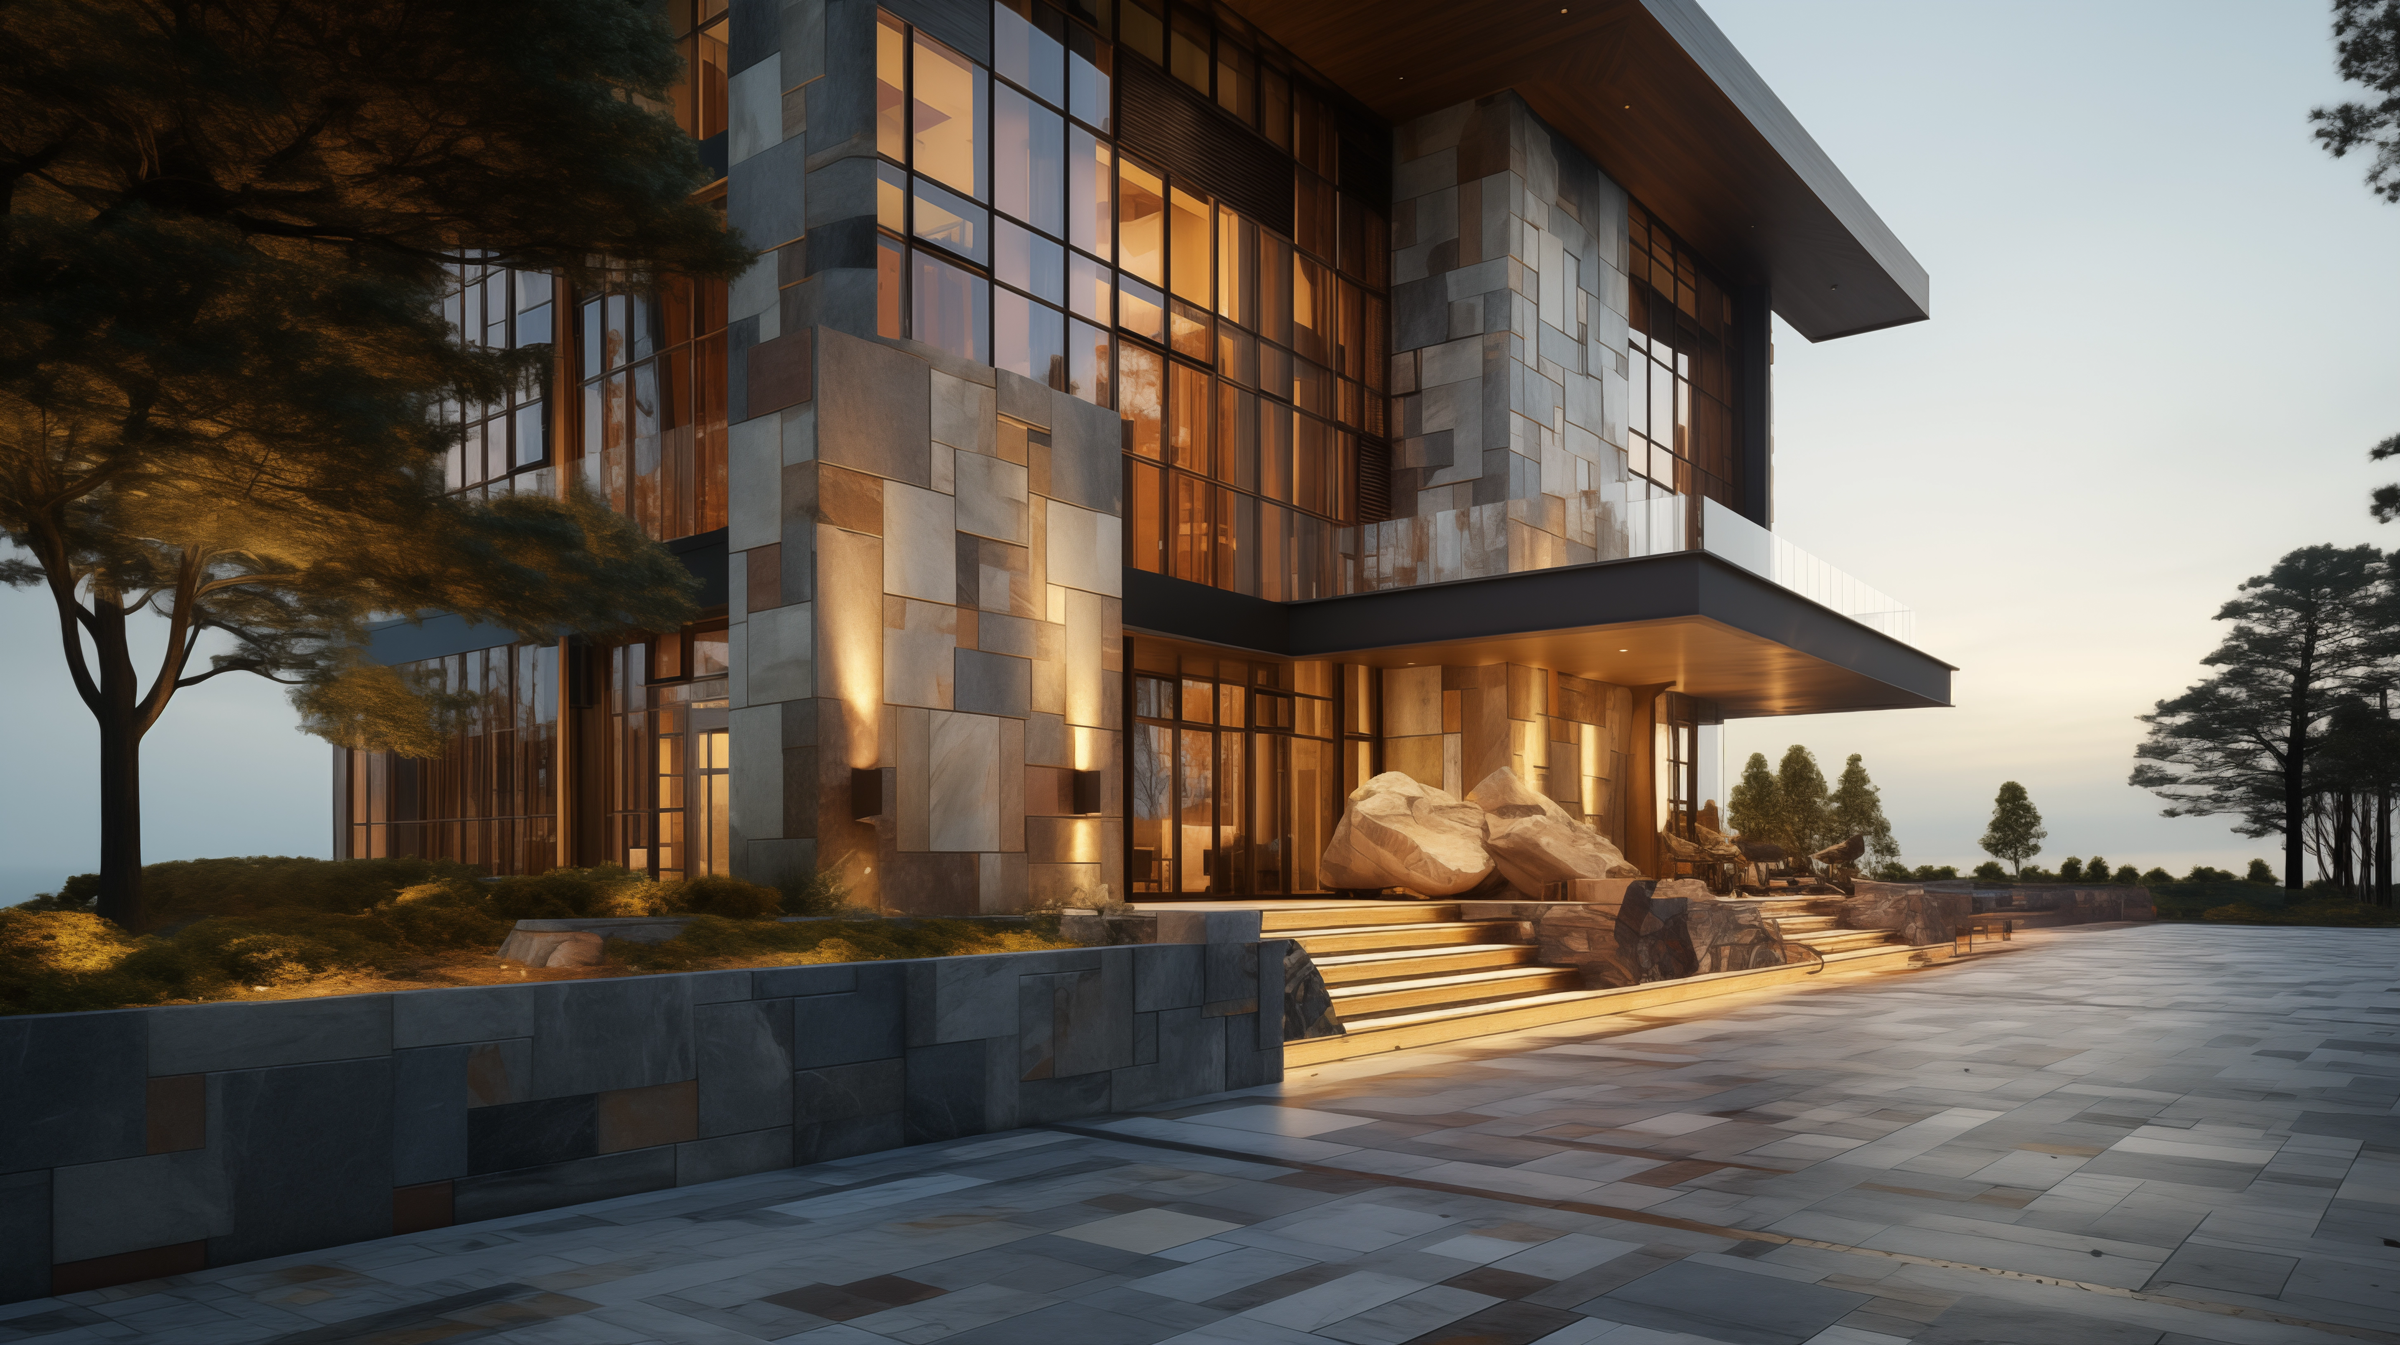 Artistic architectural design with an exterior stone wall featuring a palette of color variations. The building harmoniously blends different shades of stone, enhancing its aesthetic appeal. The setting includes trees and modern lighting.